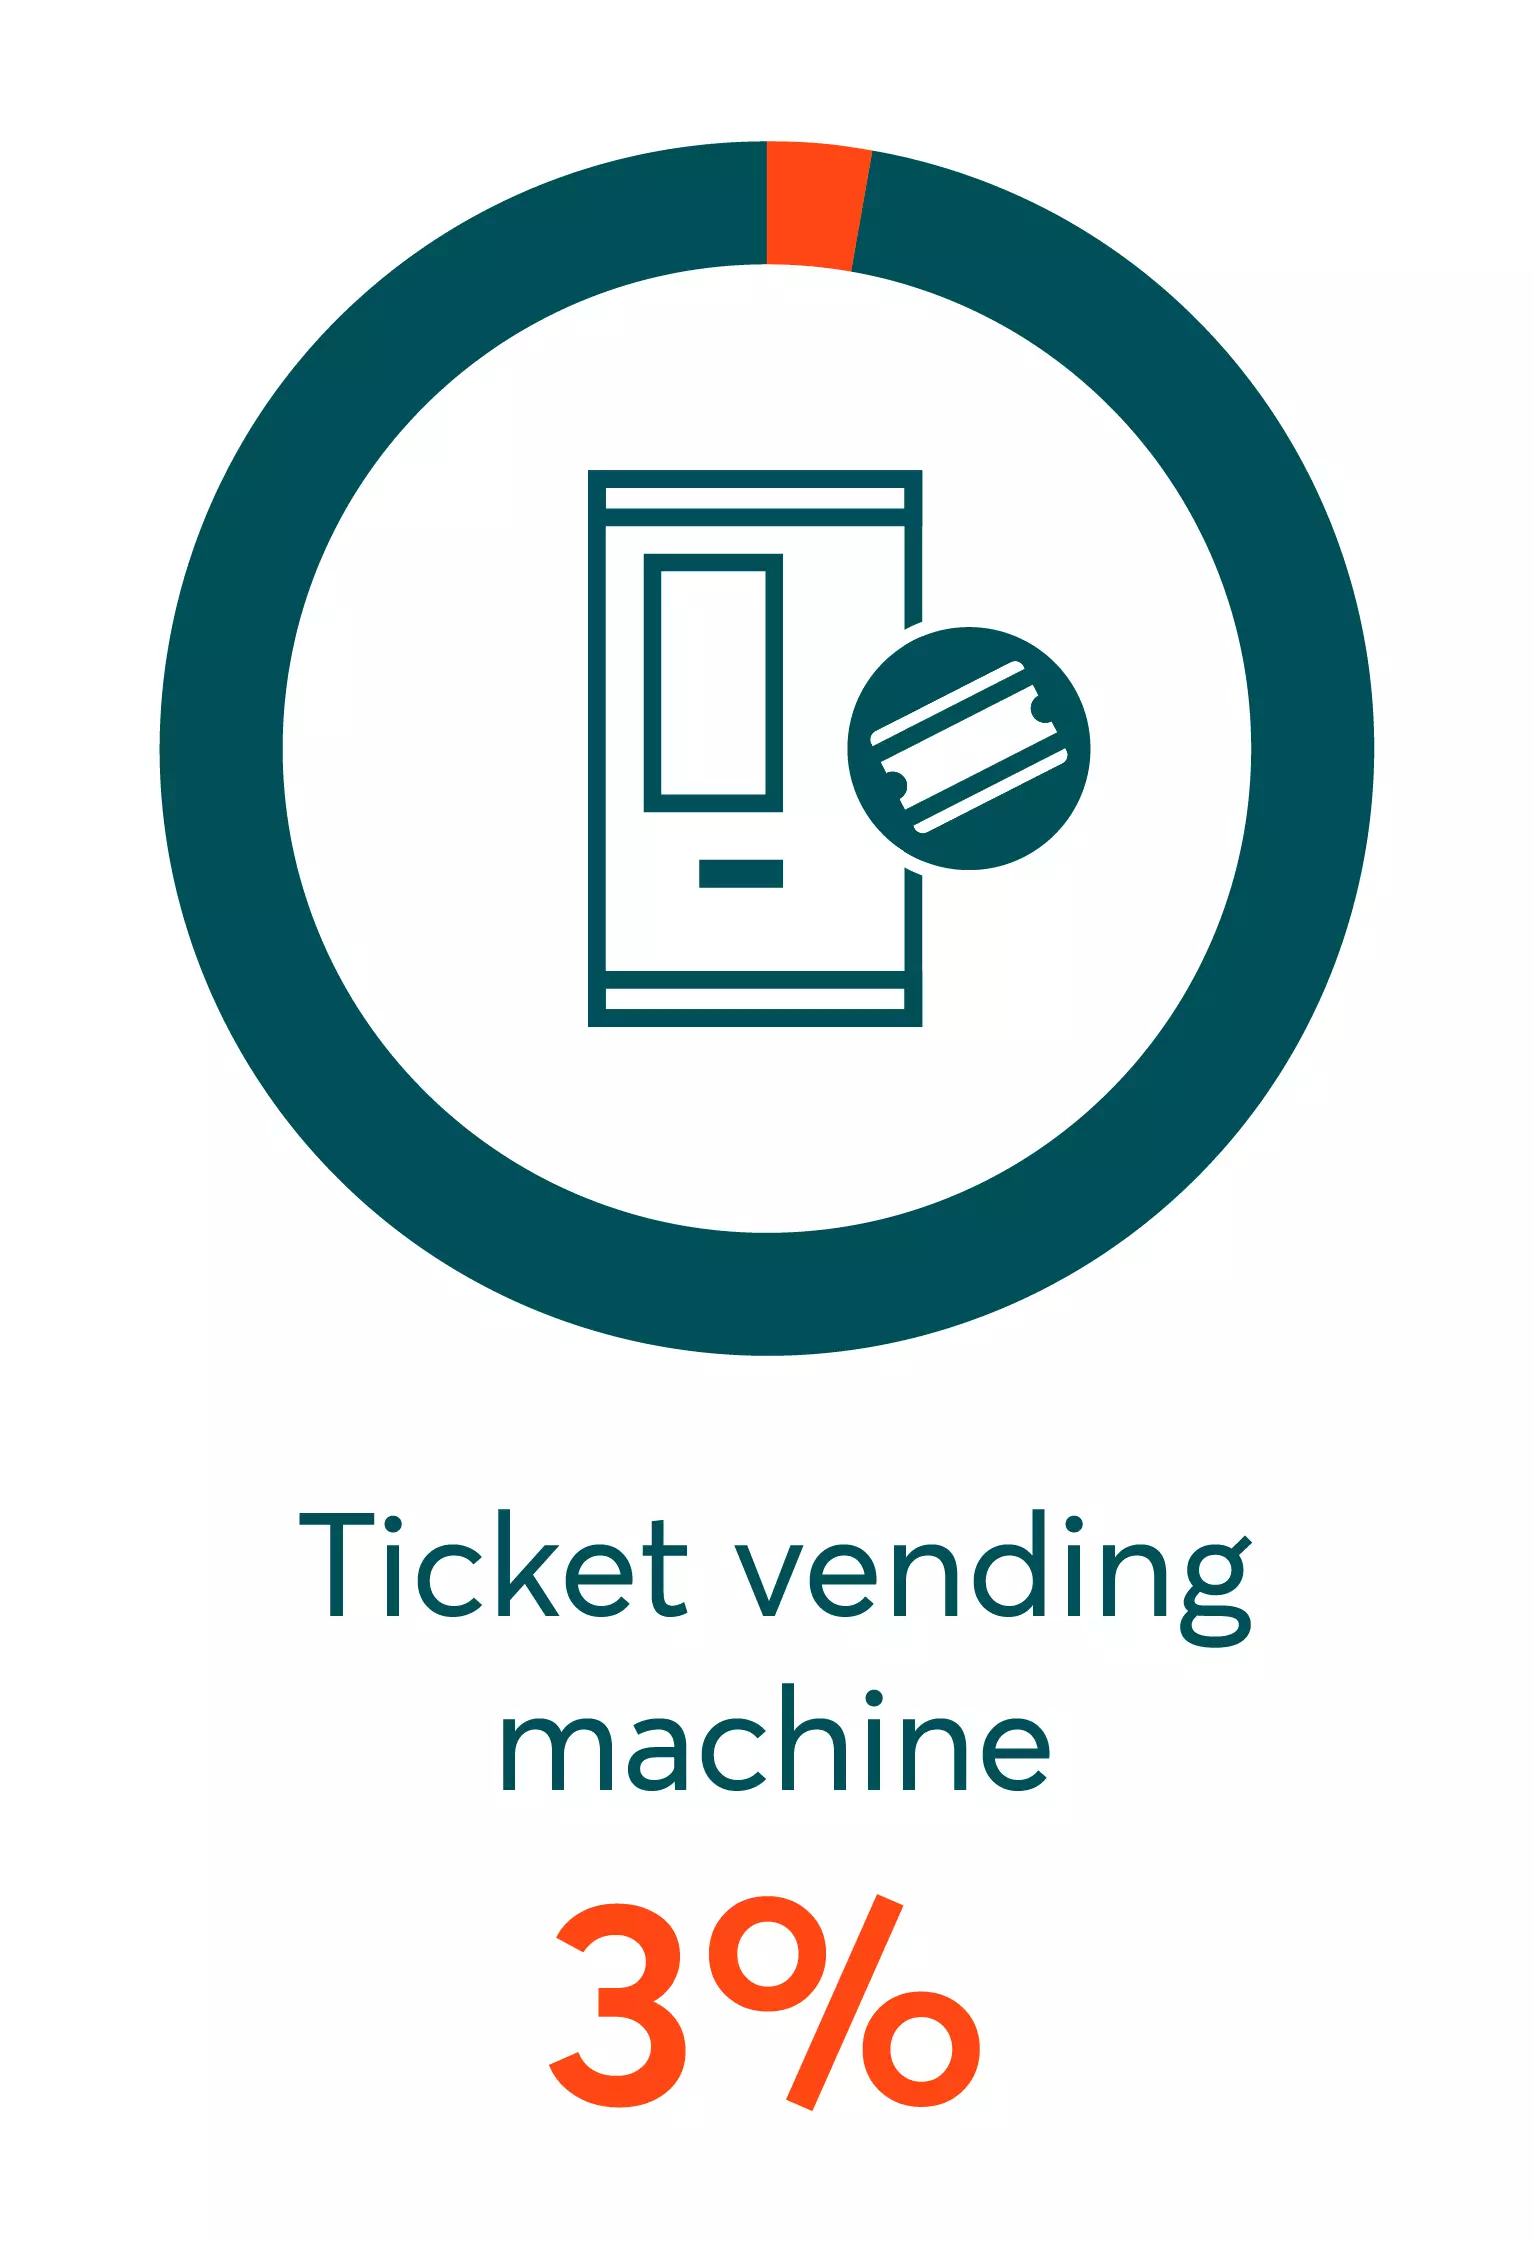 Pie chart showing that 3% of people use Ticket vending machines to purchase their tickets.